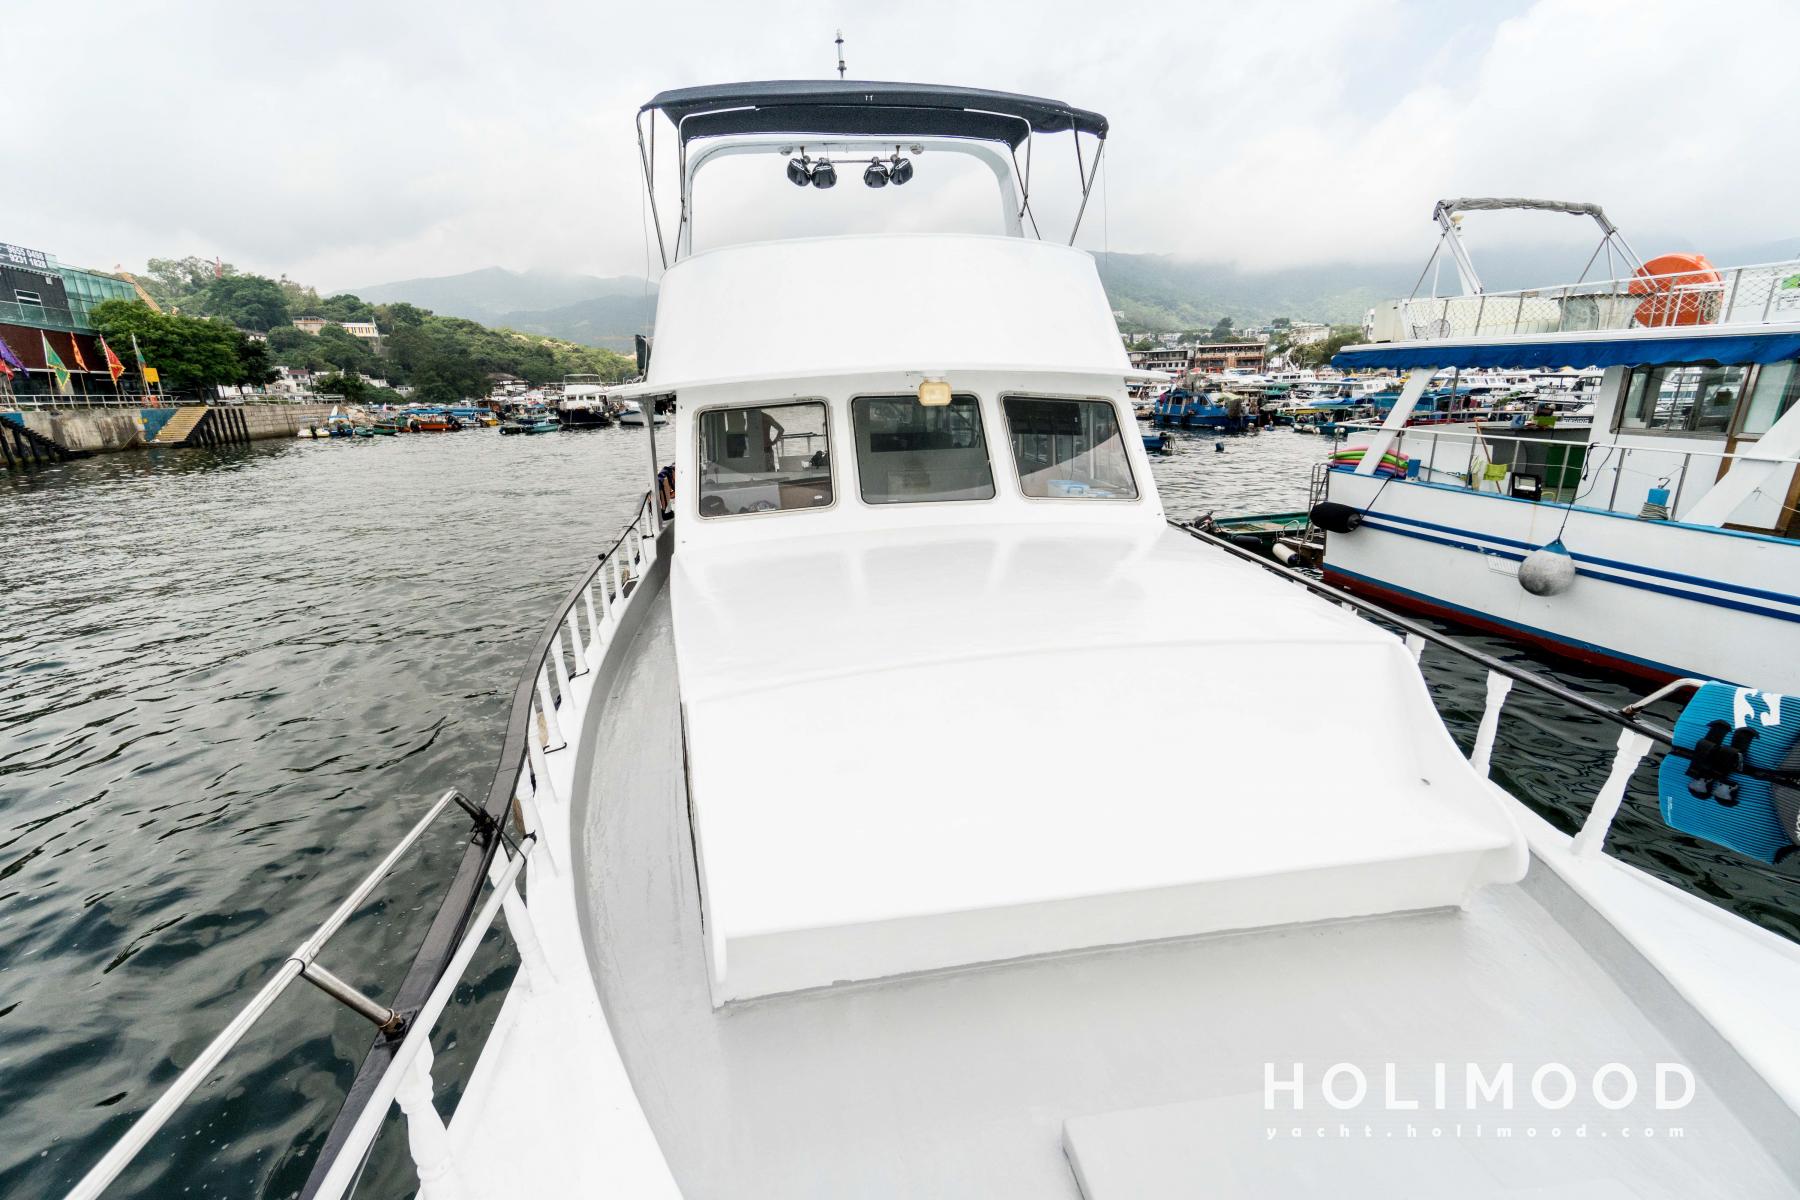 HG01 Sai Kung All-inclusive Boat Trip (Free lunch, Crab Congee, Professional Wakeboard and latest water toys) 17